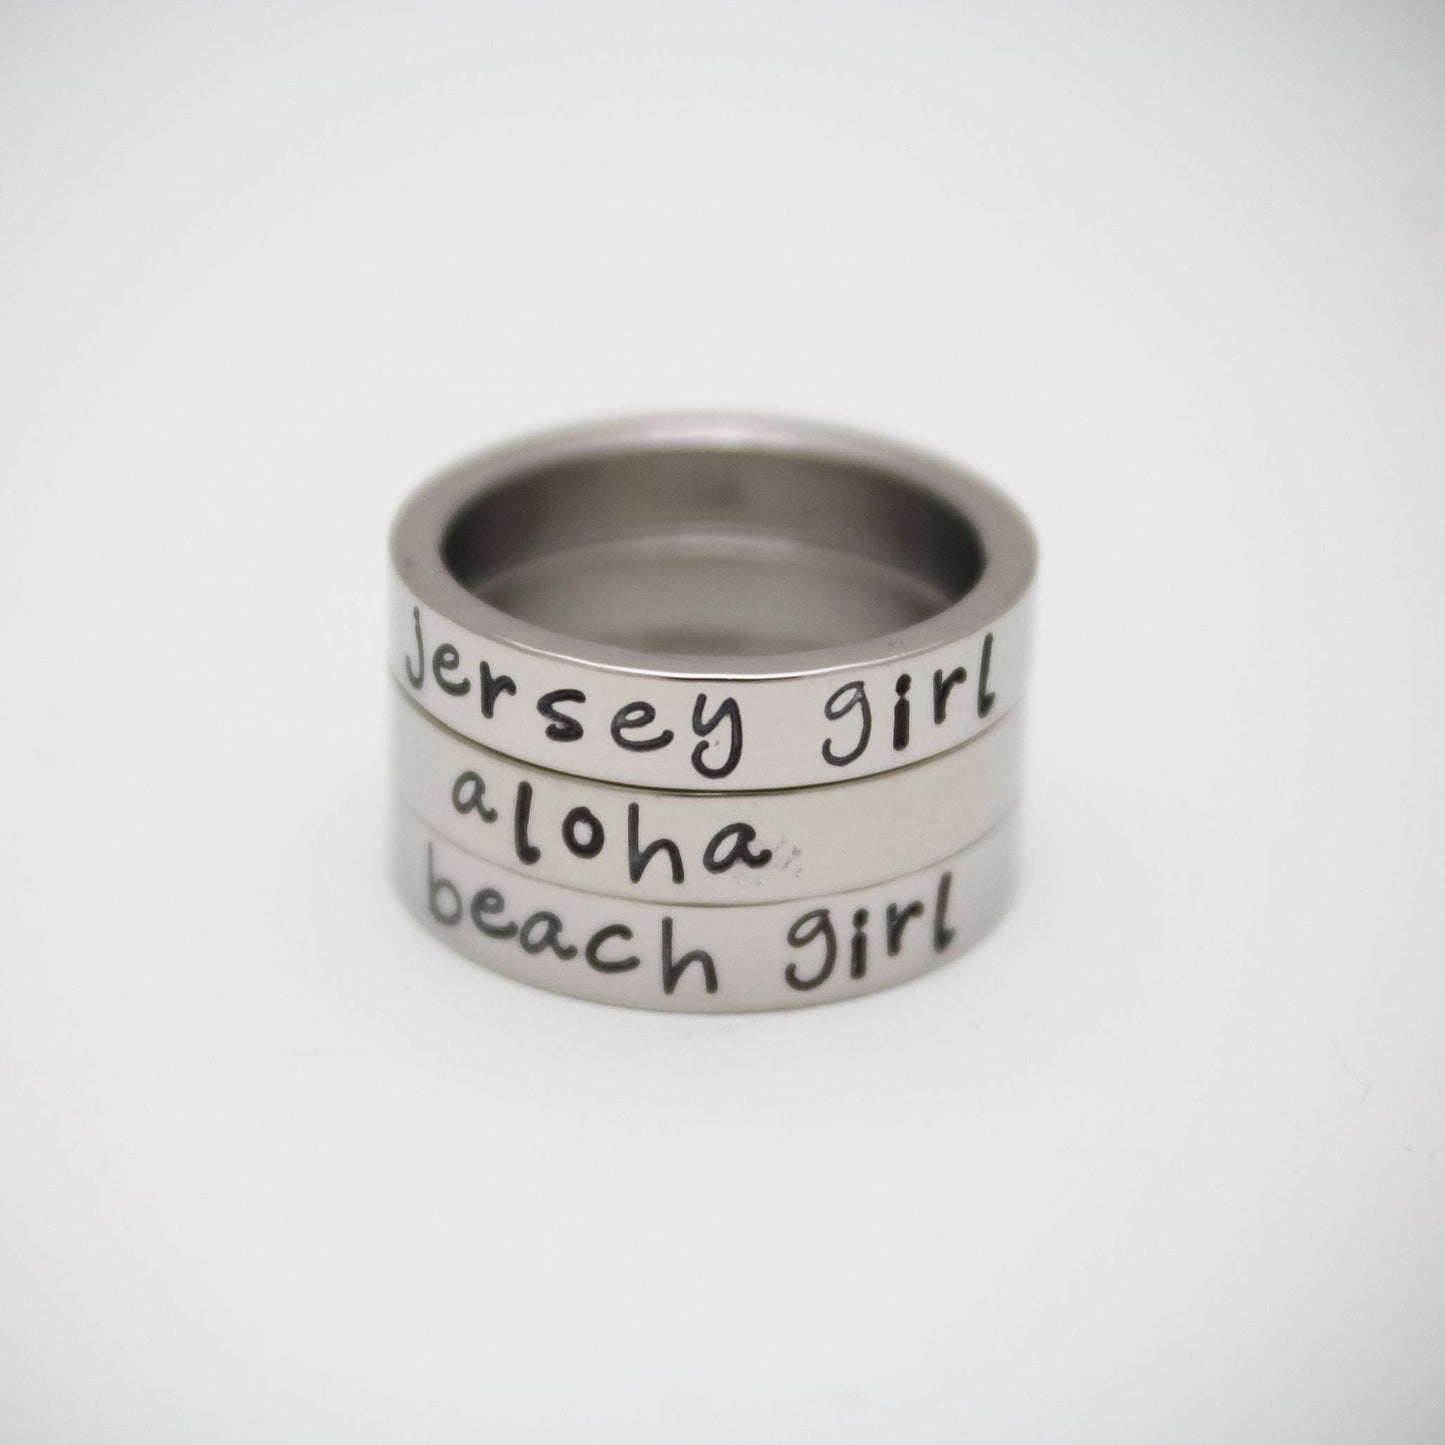 Personalized Stacking Ring, Customized Silver Ring, Hand Stamped Stainless Steel Name Ring, Shiny Silver Custom Ring, Stacking Rings